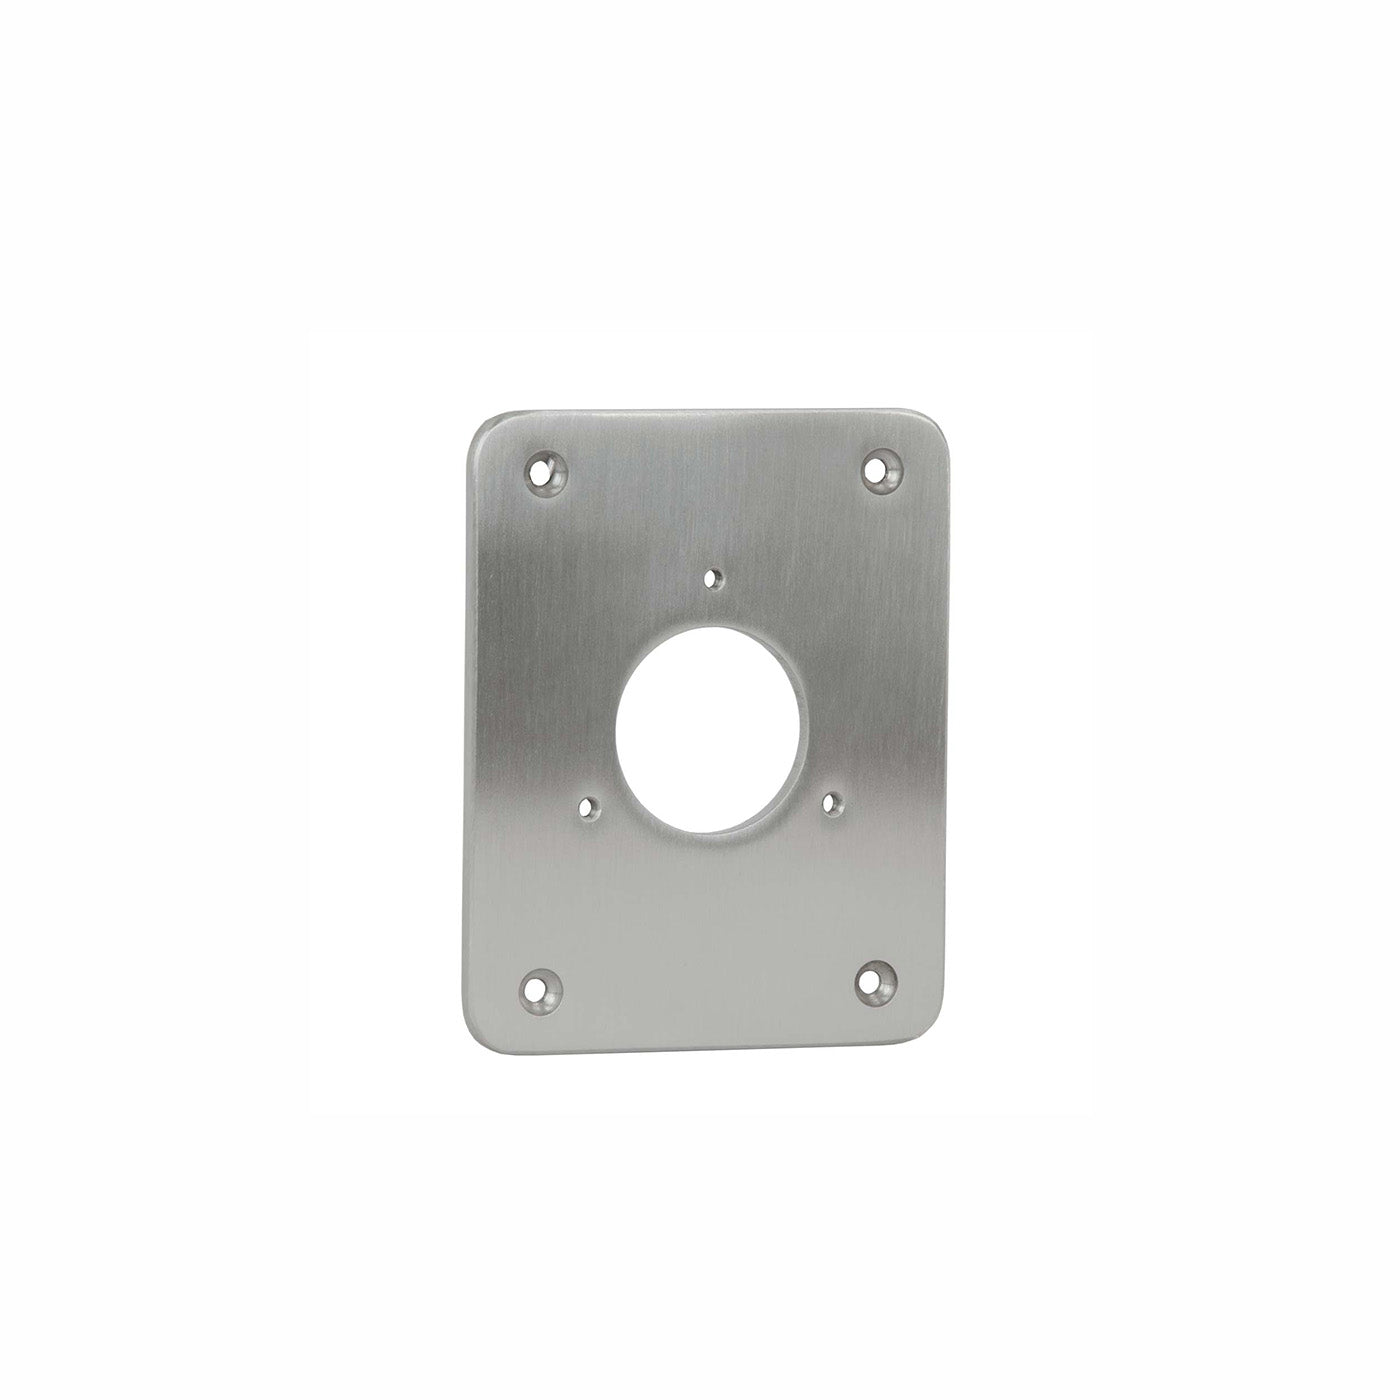 Stainless Steel Mounting Plate V1+ for House Hydrant V1/V1+, Universal Hydrant, Marine Deckwash, and RV City Water Inlet